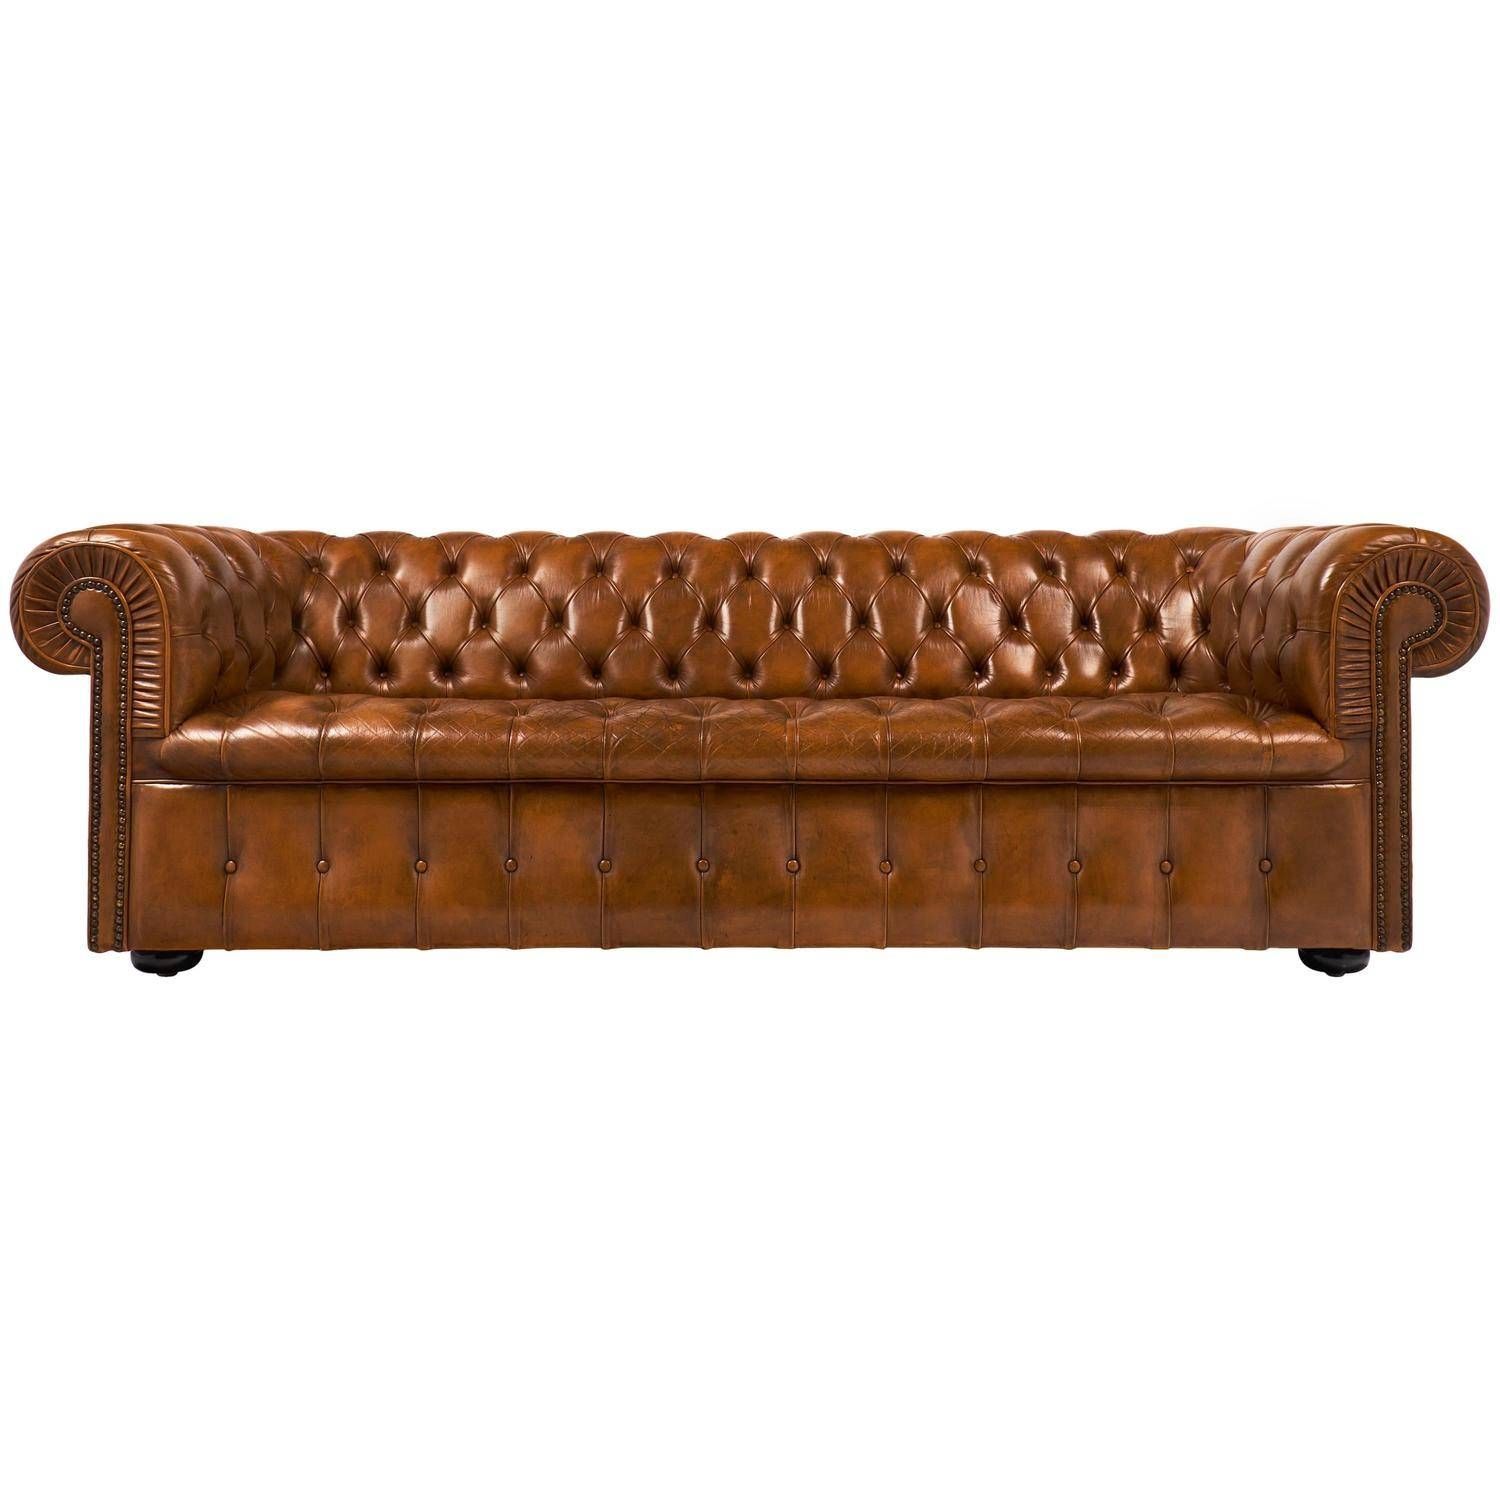 Vintage English Cognac Leather Chesterfield Sofa At 1stdibs Within Vintage Chesterfield Sofas (View 10 of 30)